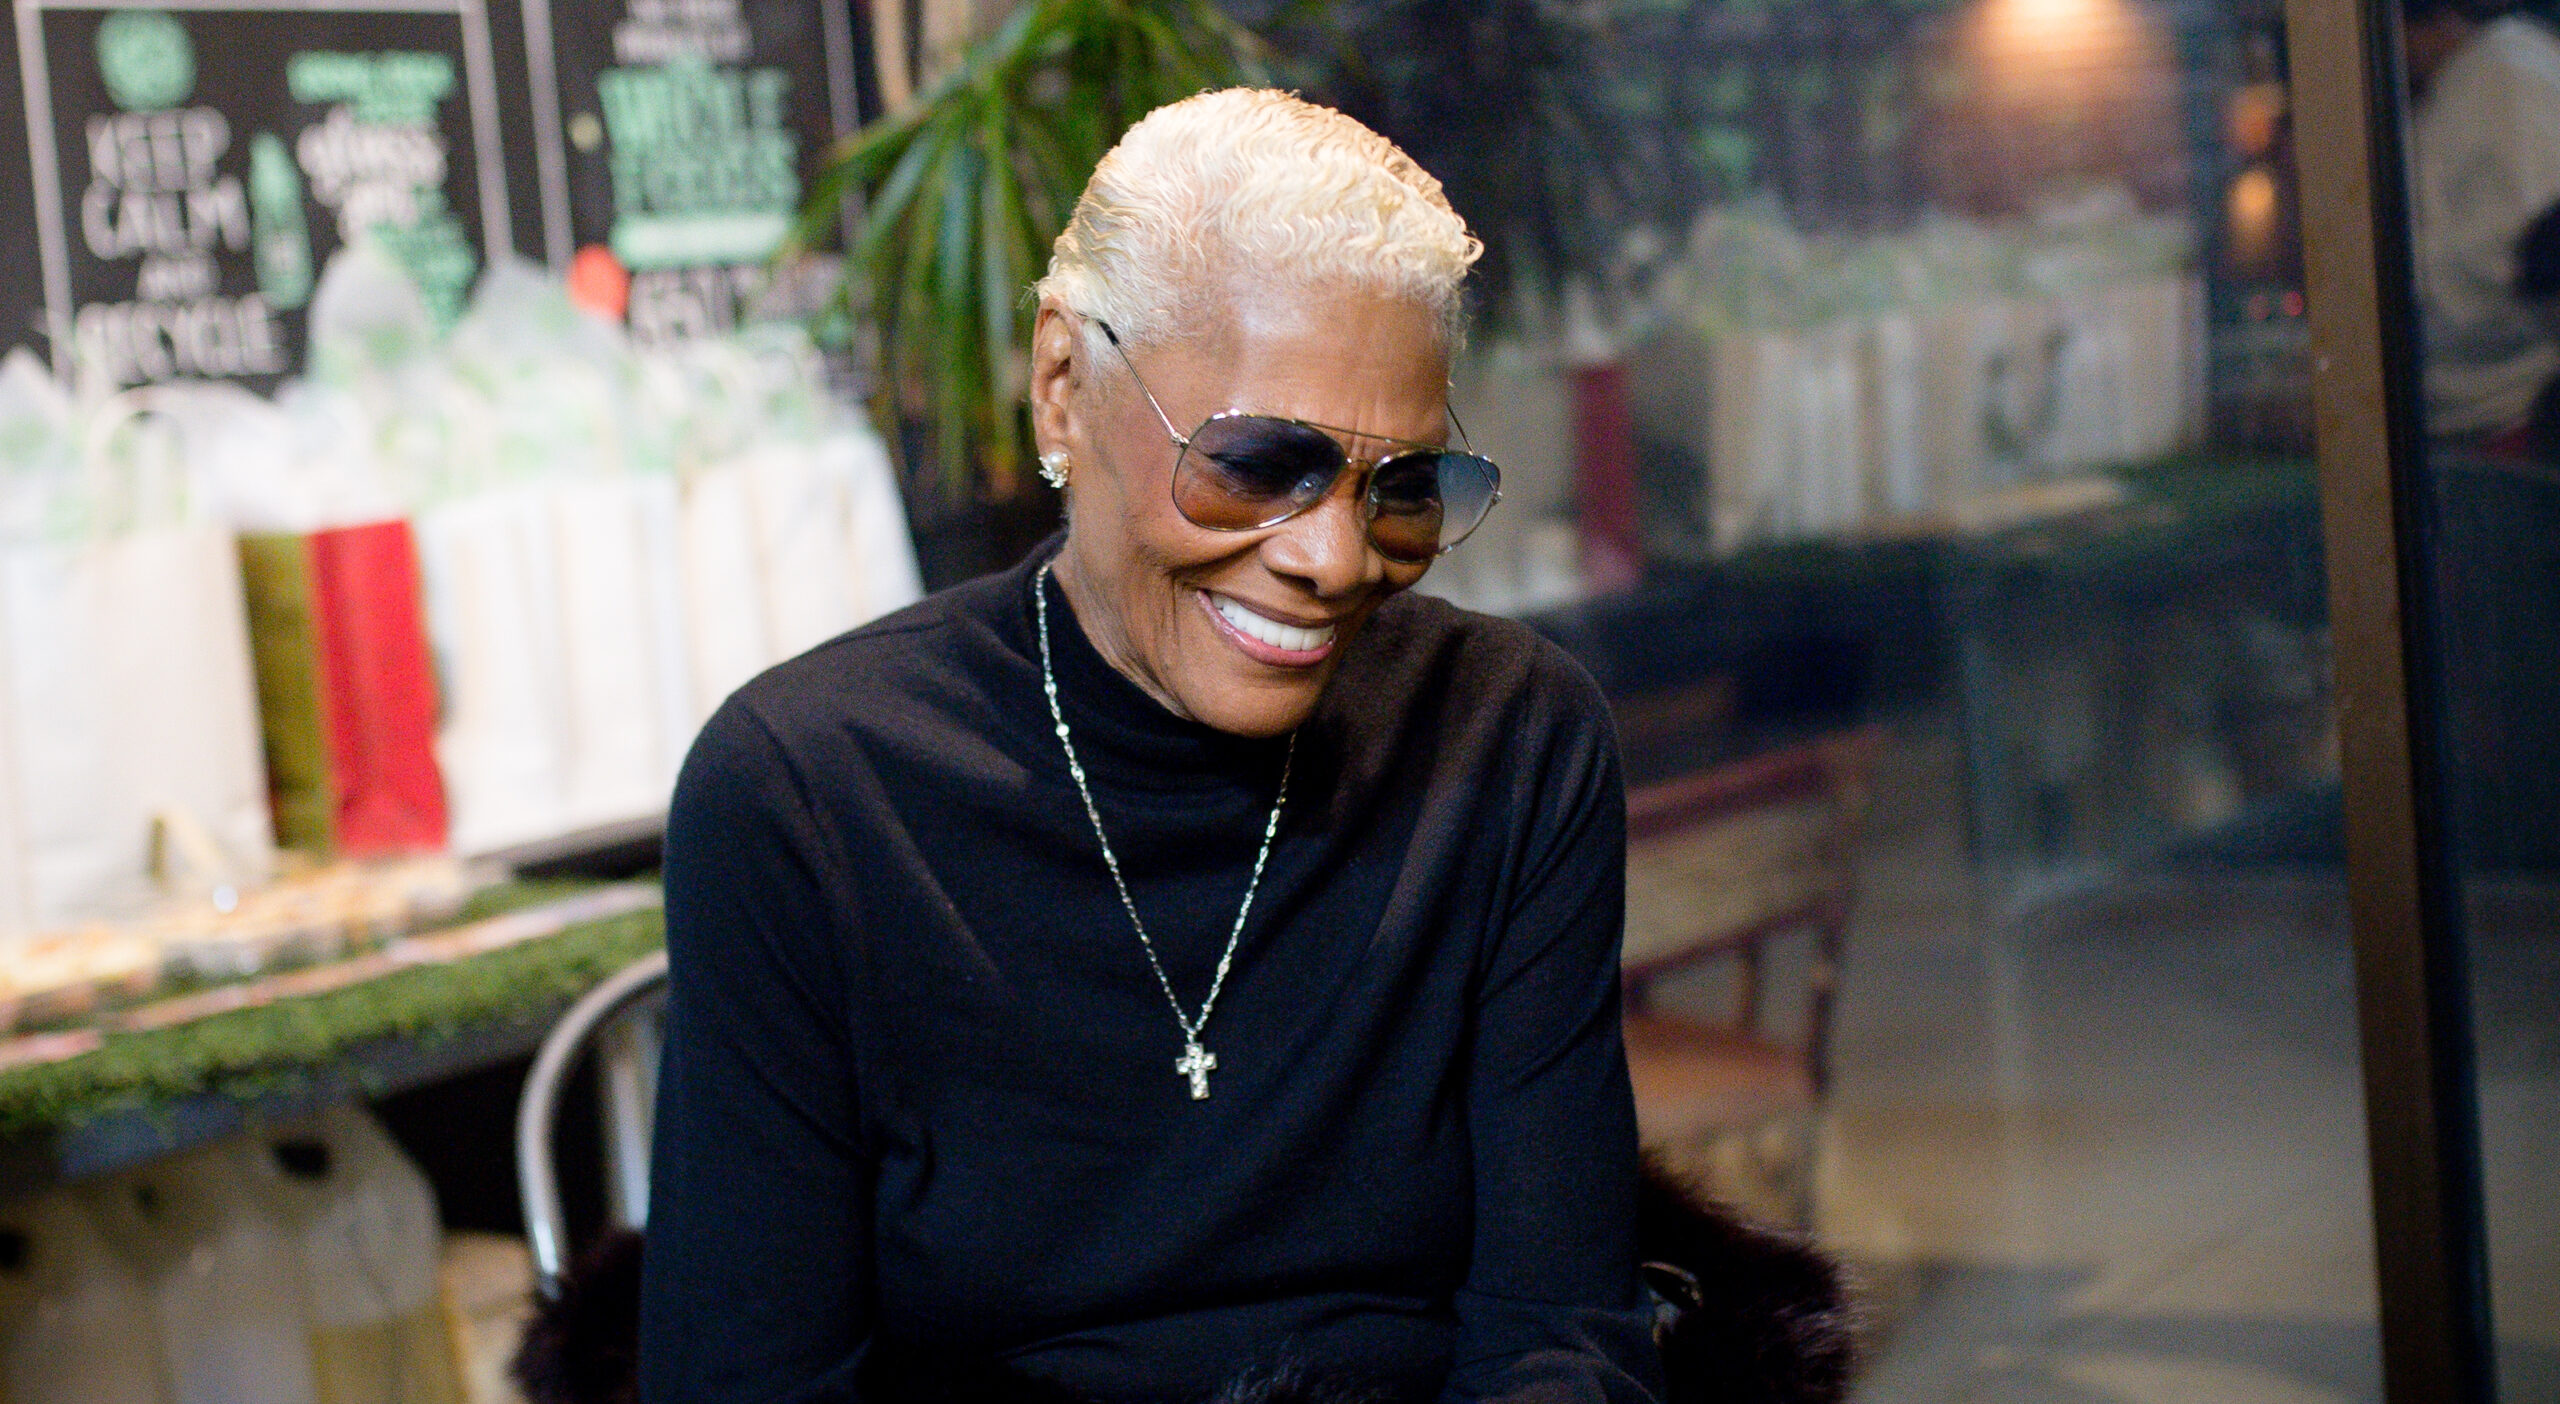 Dionne Warwick’s Series About Her Life In The Works, Teyana Taylor May Star In And Produce It